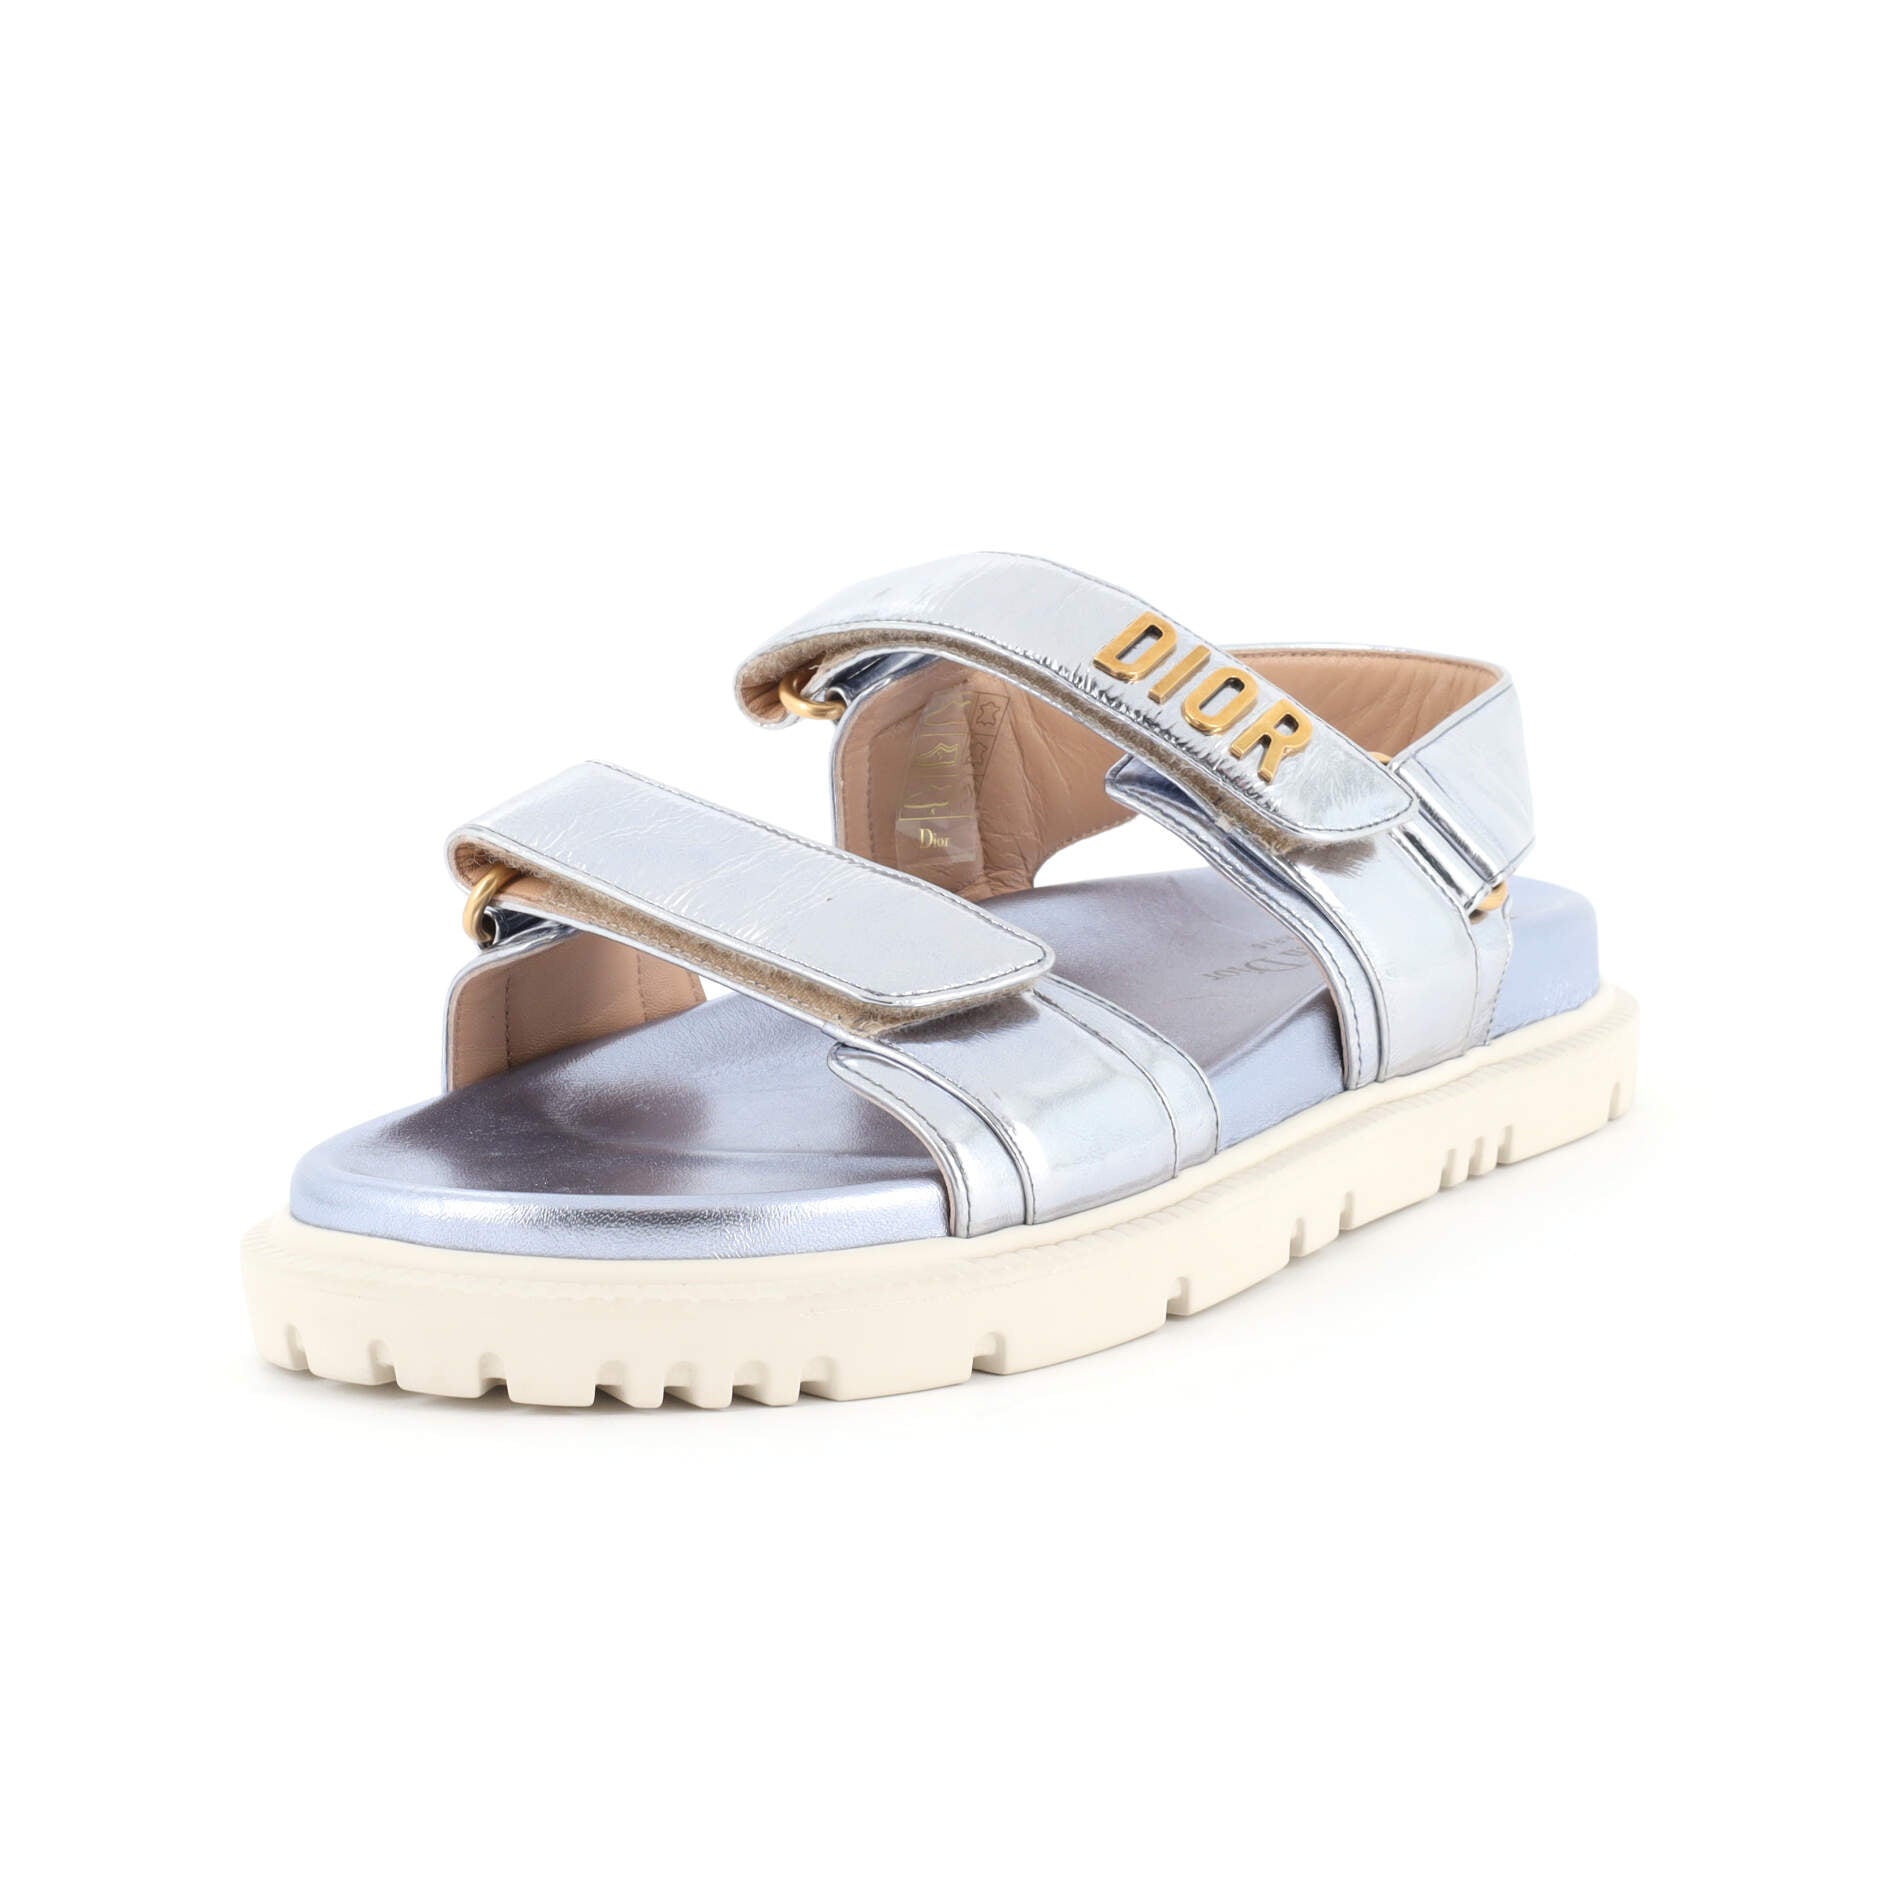 Women's DiorAct Sandals Leather